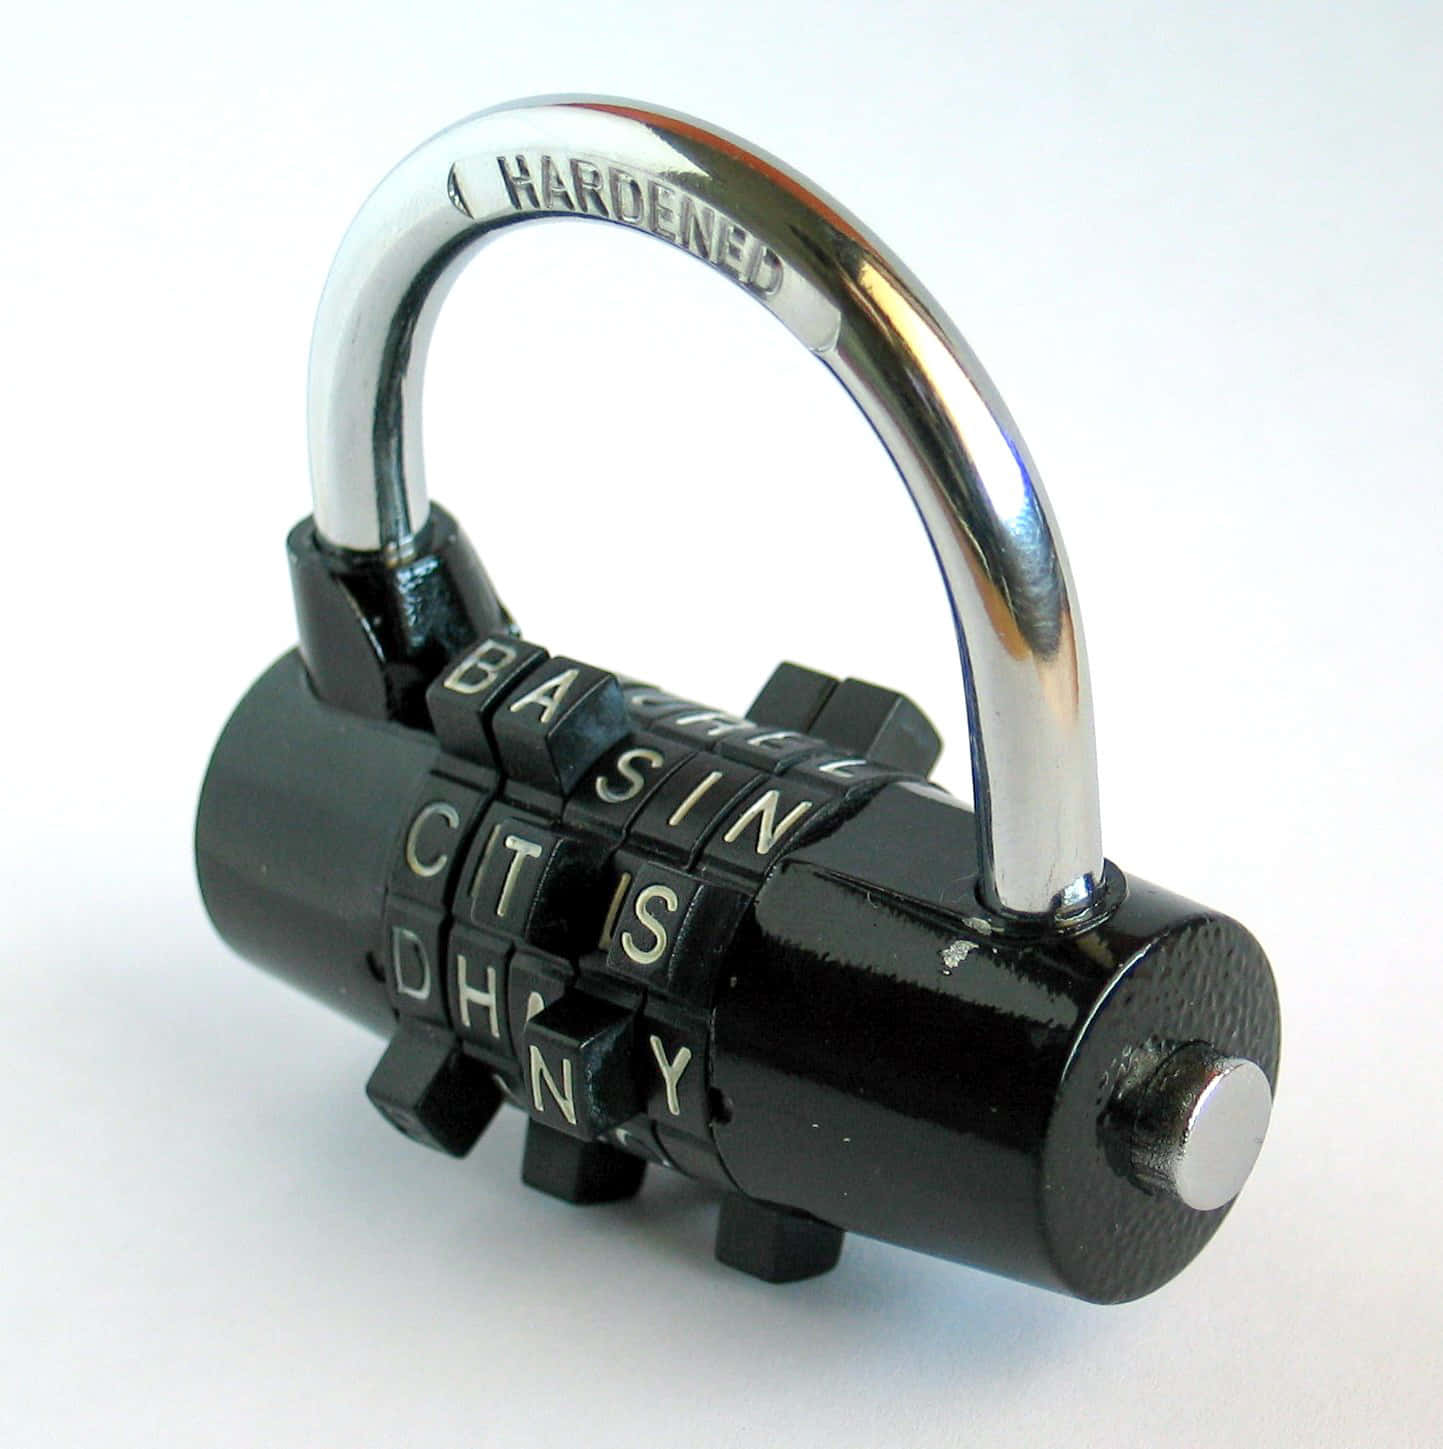 The Ultimate Accessory - Keep Your Valuables Safe with a Lock